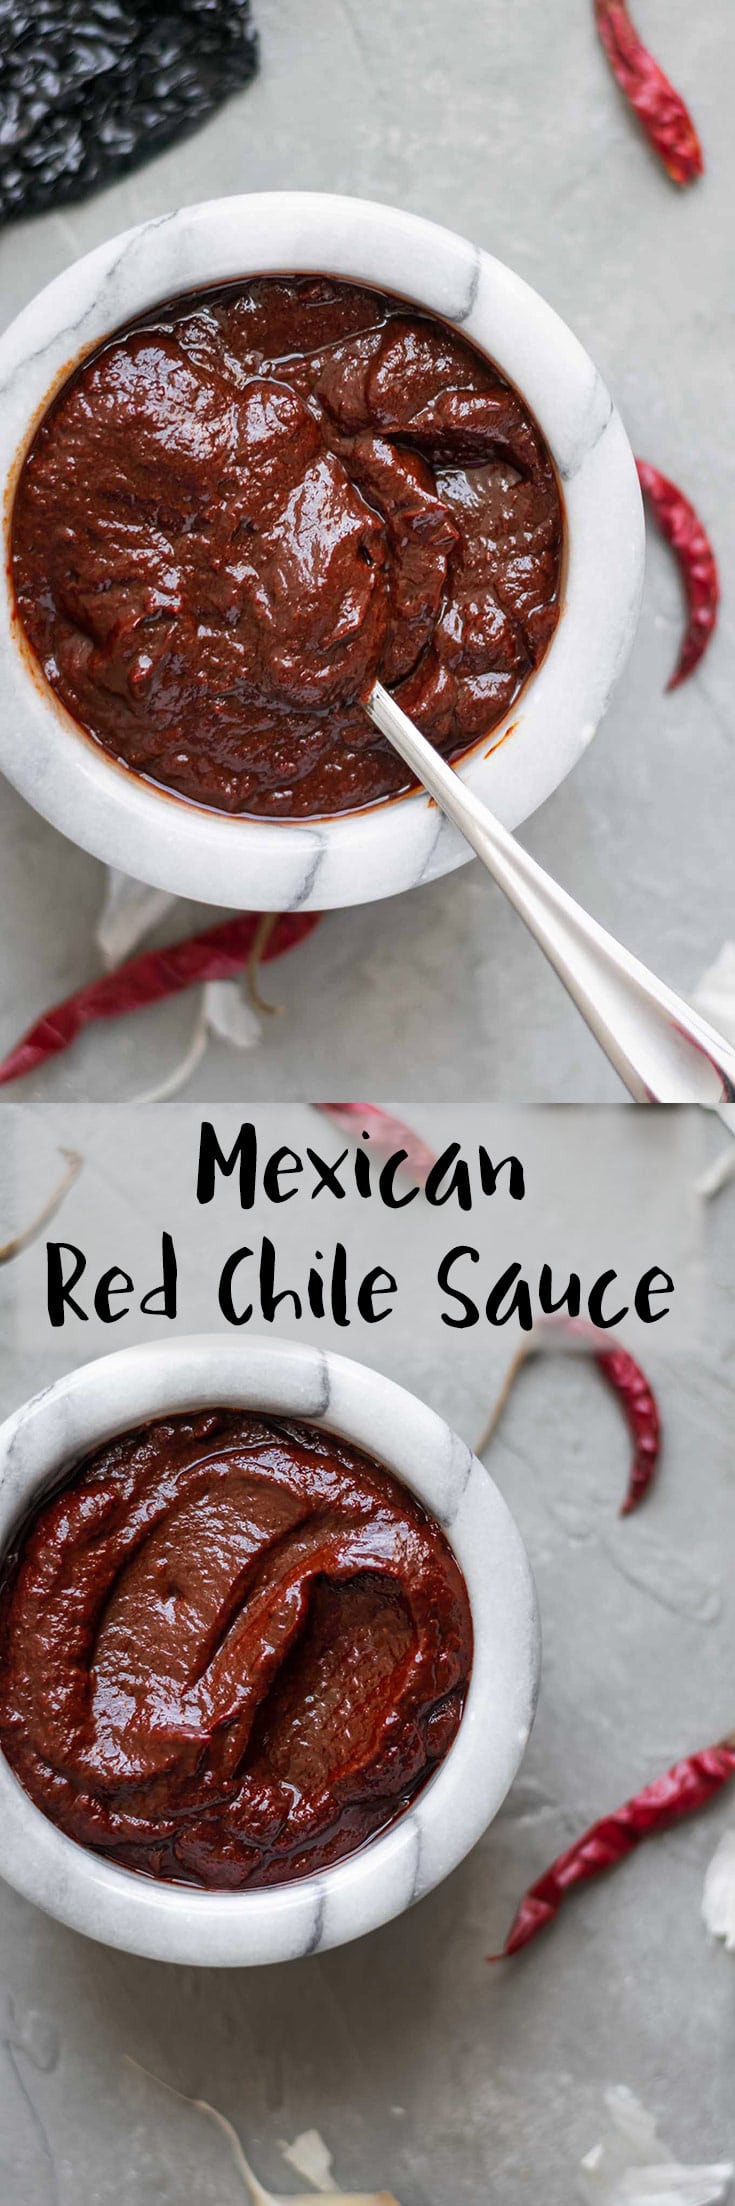 A complex and flavorful red chile sauce which makes a delicious base for your Mexican recipes. It's great in your vegan taco meats, as a base to Mexican soups, as an enchilada sauce, on roasted vegetables, and more! | thecuriouschickpea.com #vegan #mexican #glutenfree